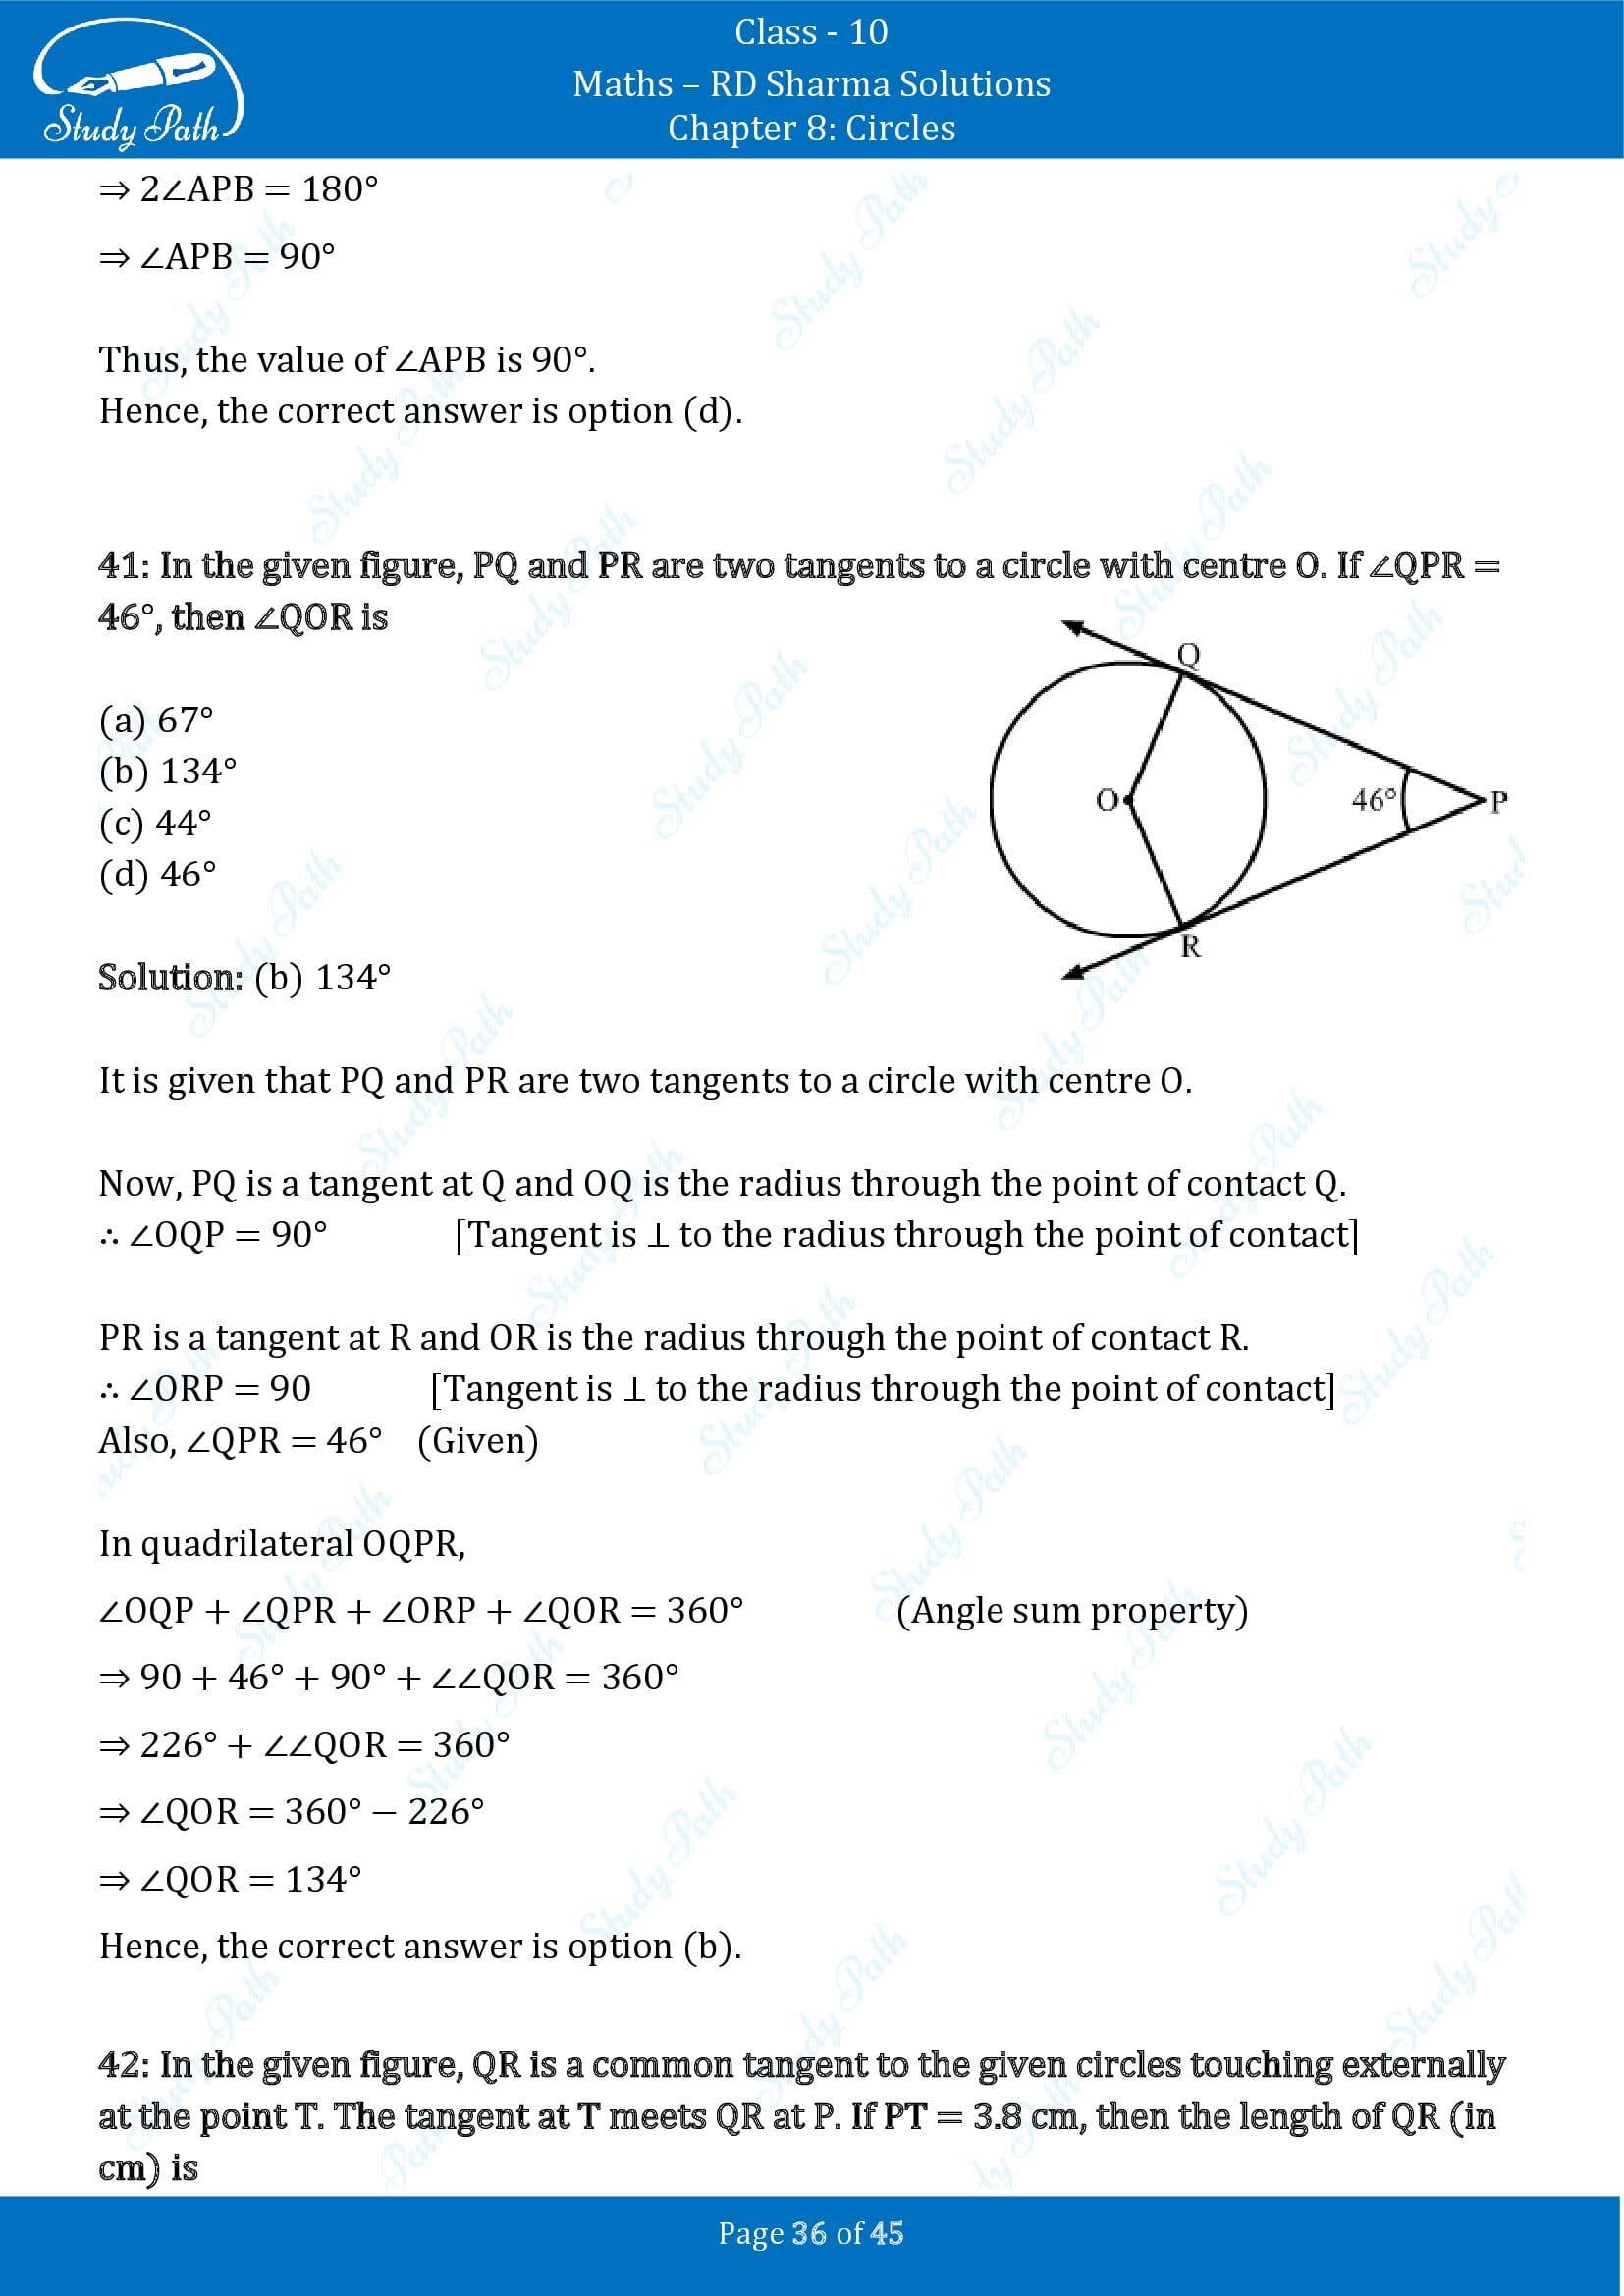 RD Sharma Solutions Class 10 Chapter 8 Circles Multiple Choice Questions MCQs 00036